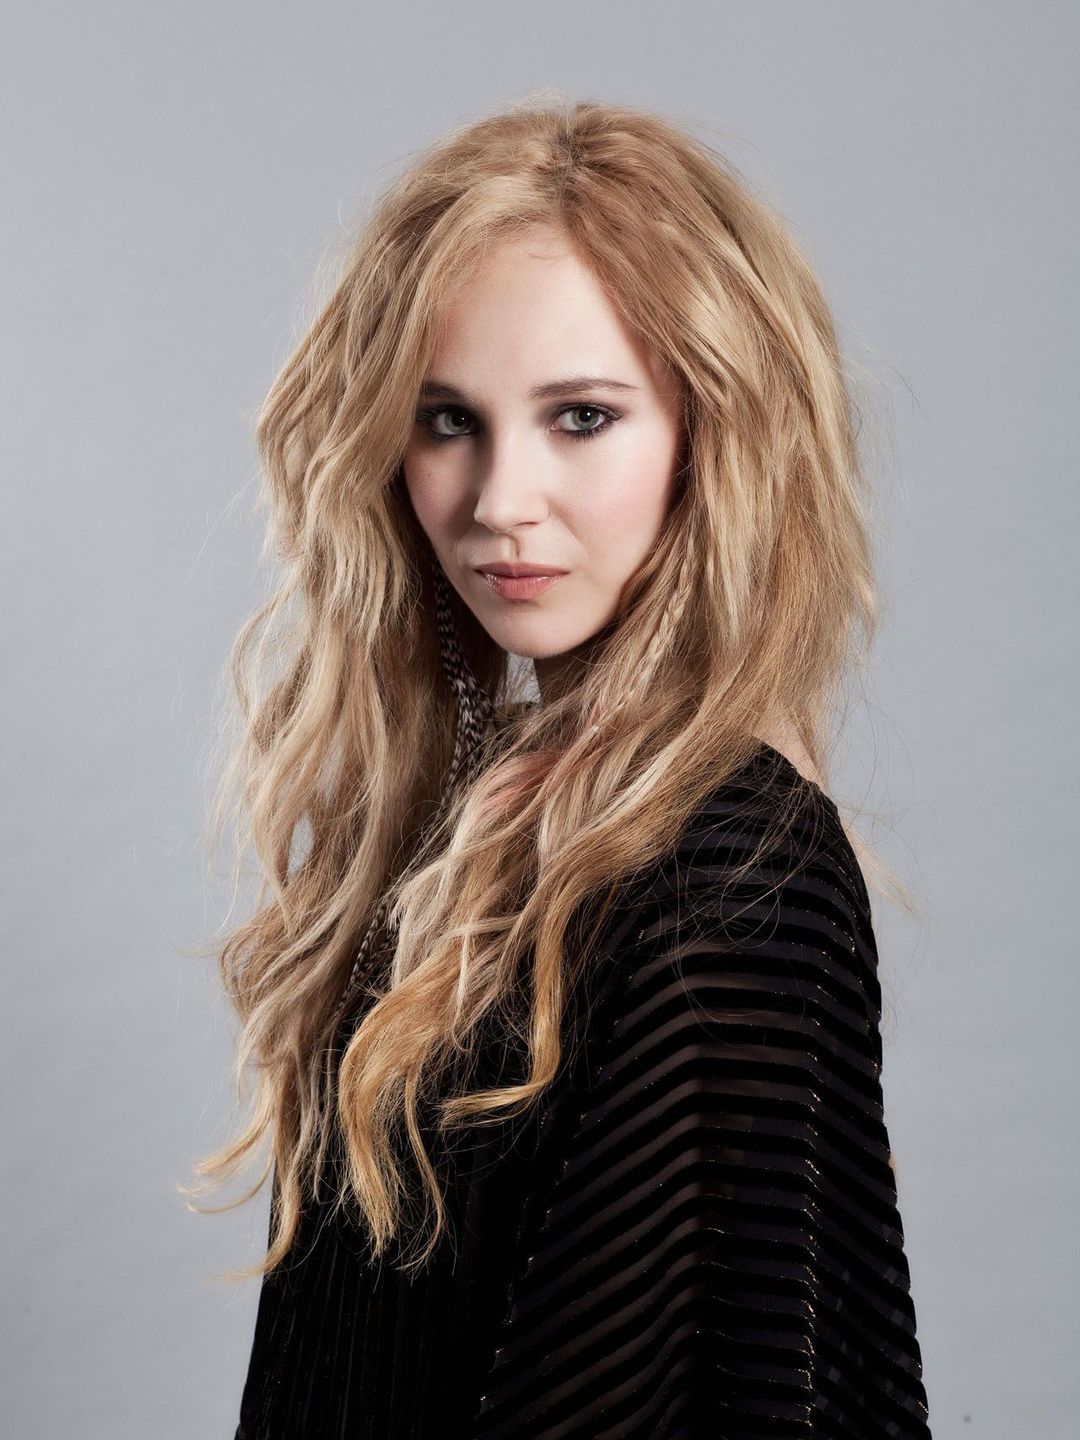 Juno Temple how did she became famous